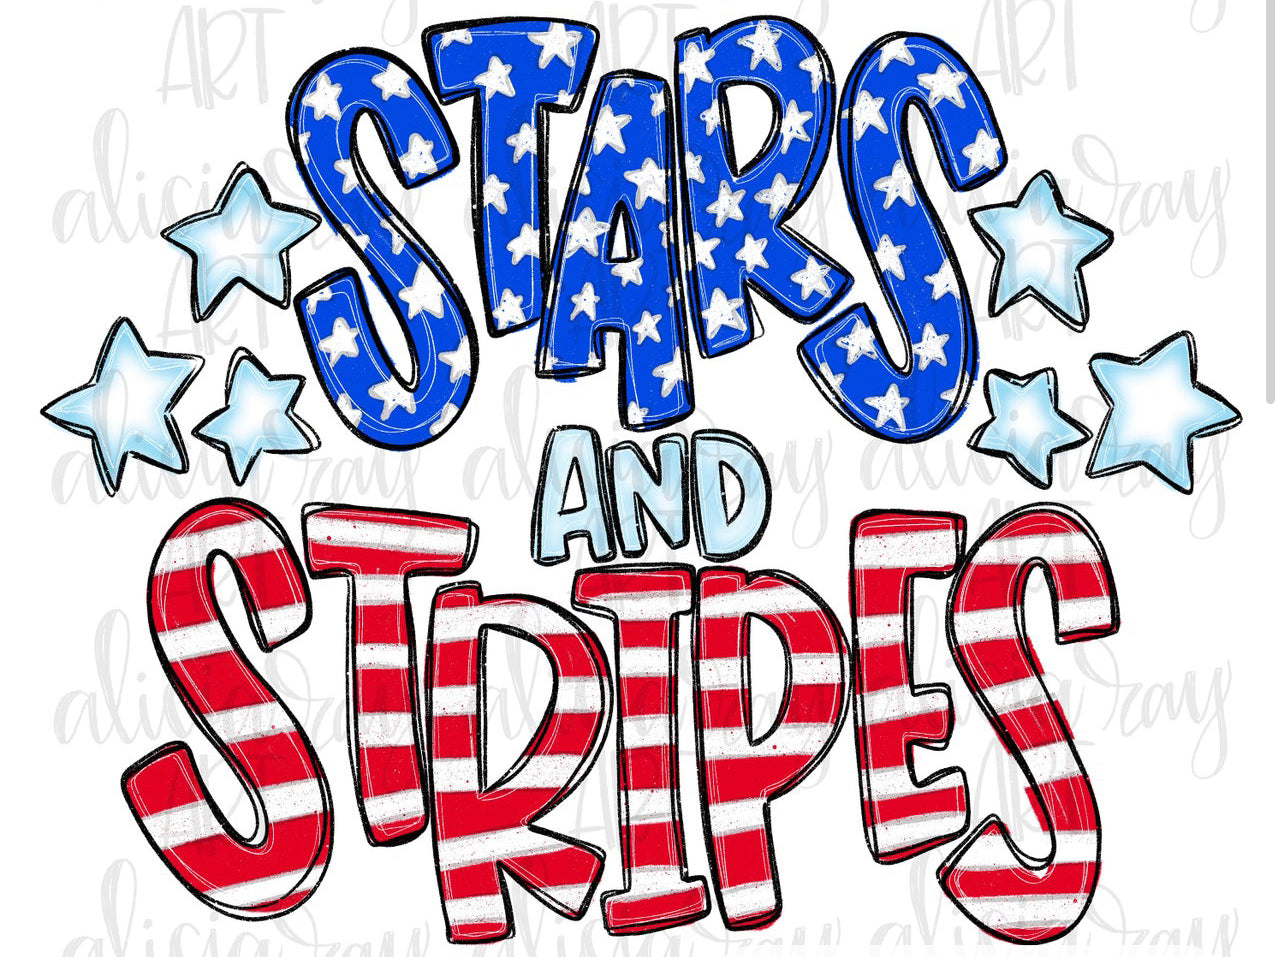 Stars and Stripes